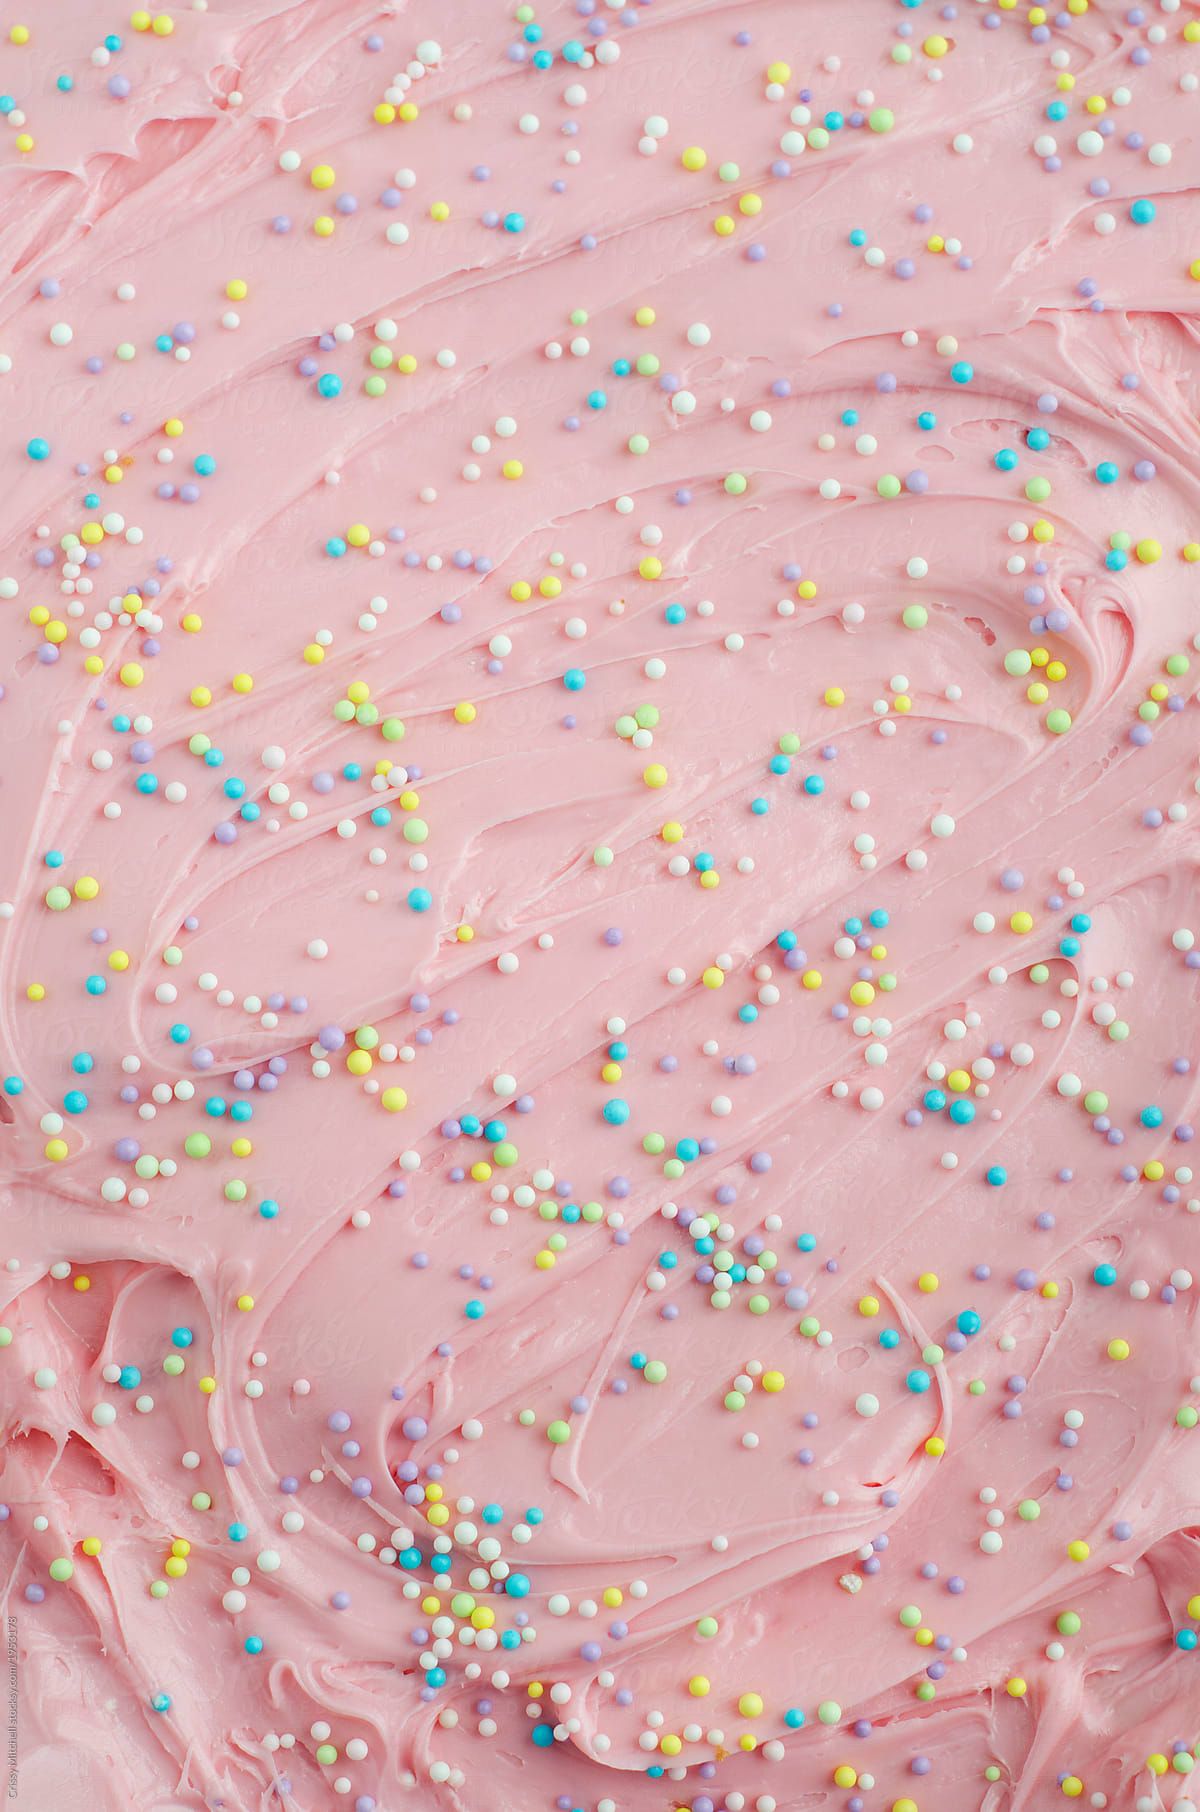 Close up of pink frosting with sprinkles on a cake - Bakery